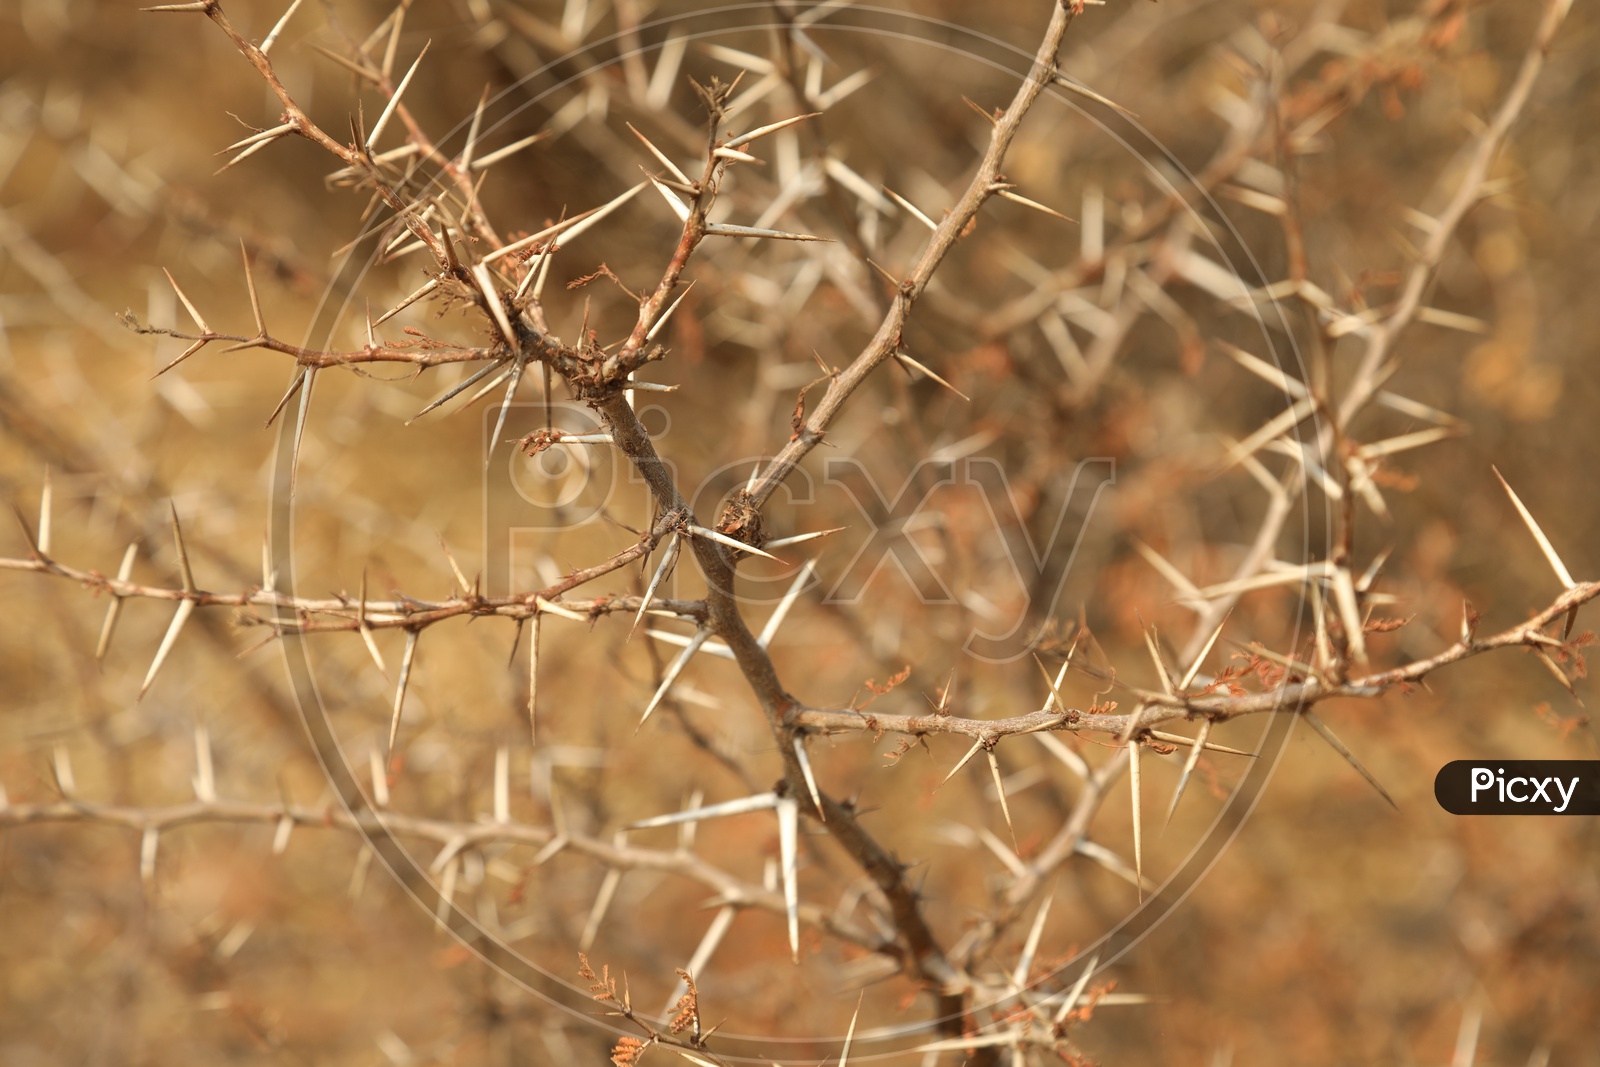 Close up of the Thorns